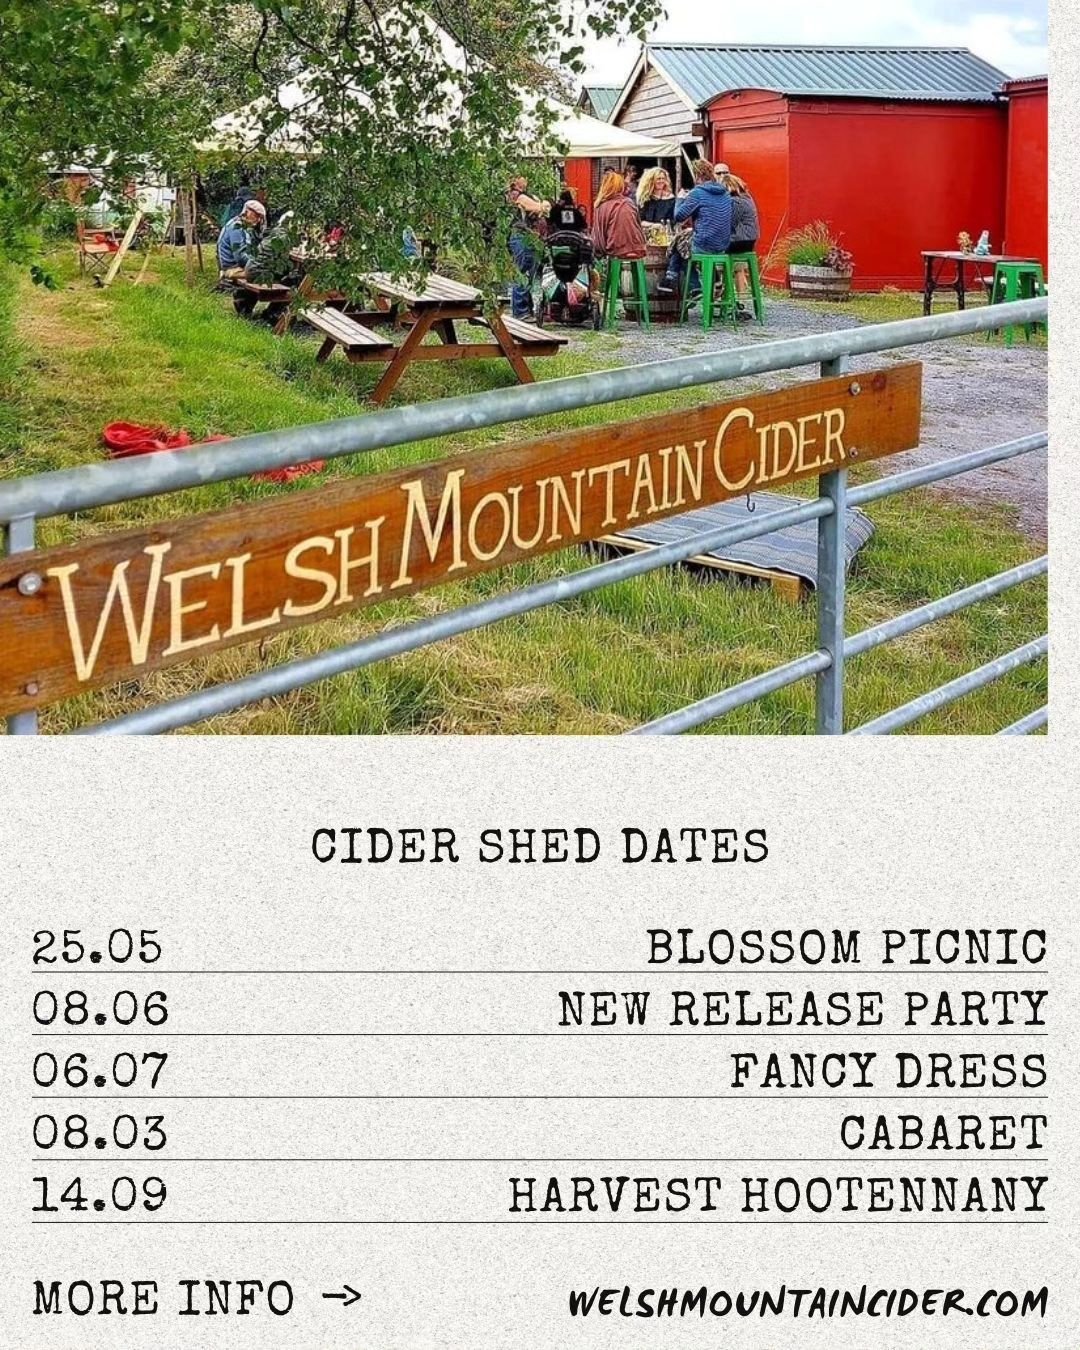 More cider shed events and dates for the summer!!!! Camping, tours and tastings available on these days. Group tours also available by arrangement on different dates. We look forward to seeing you!